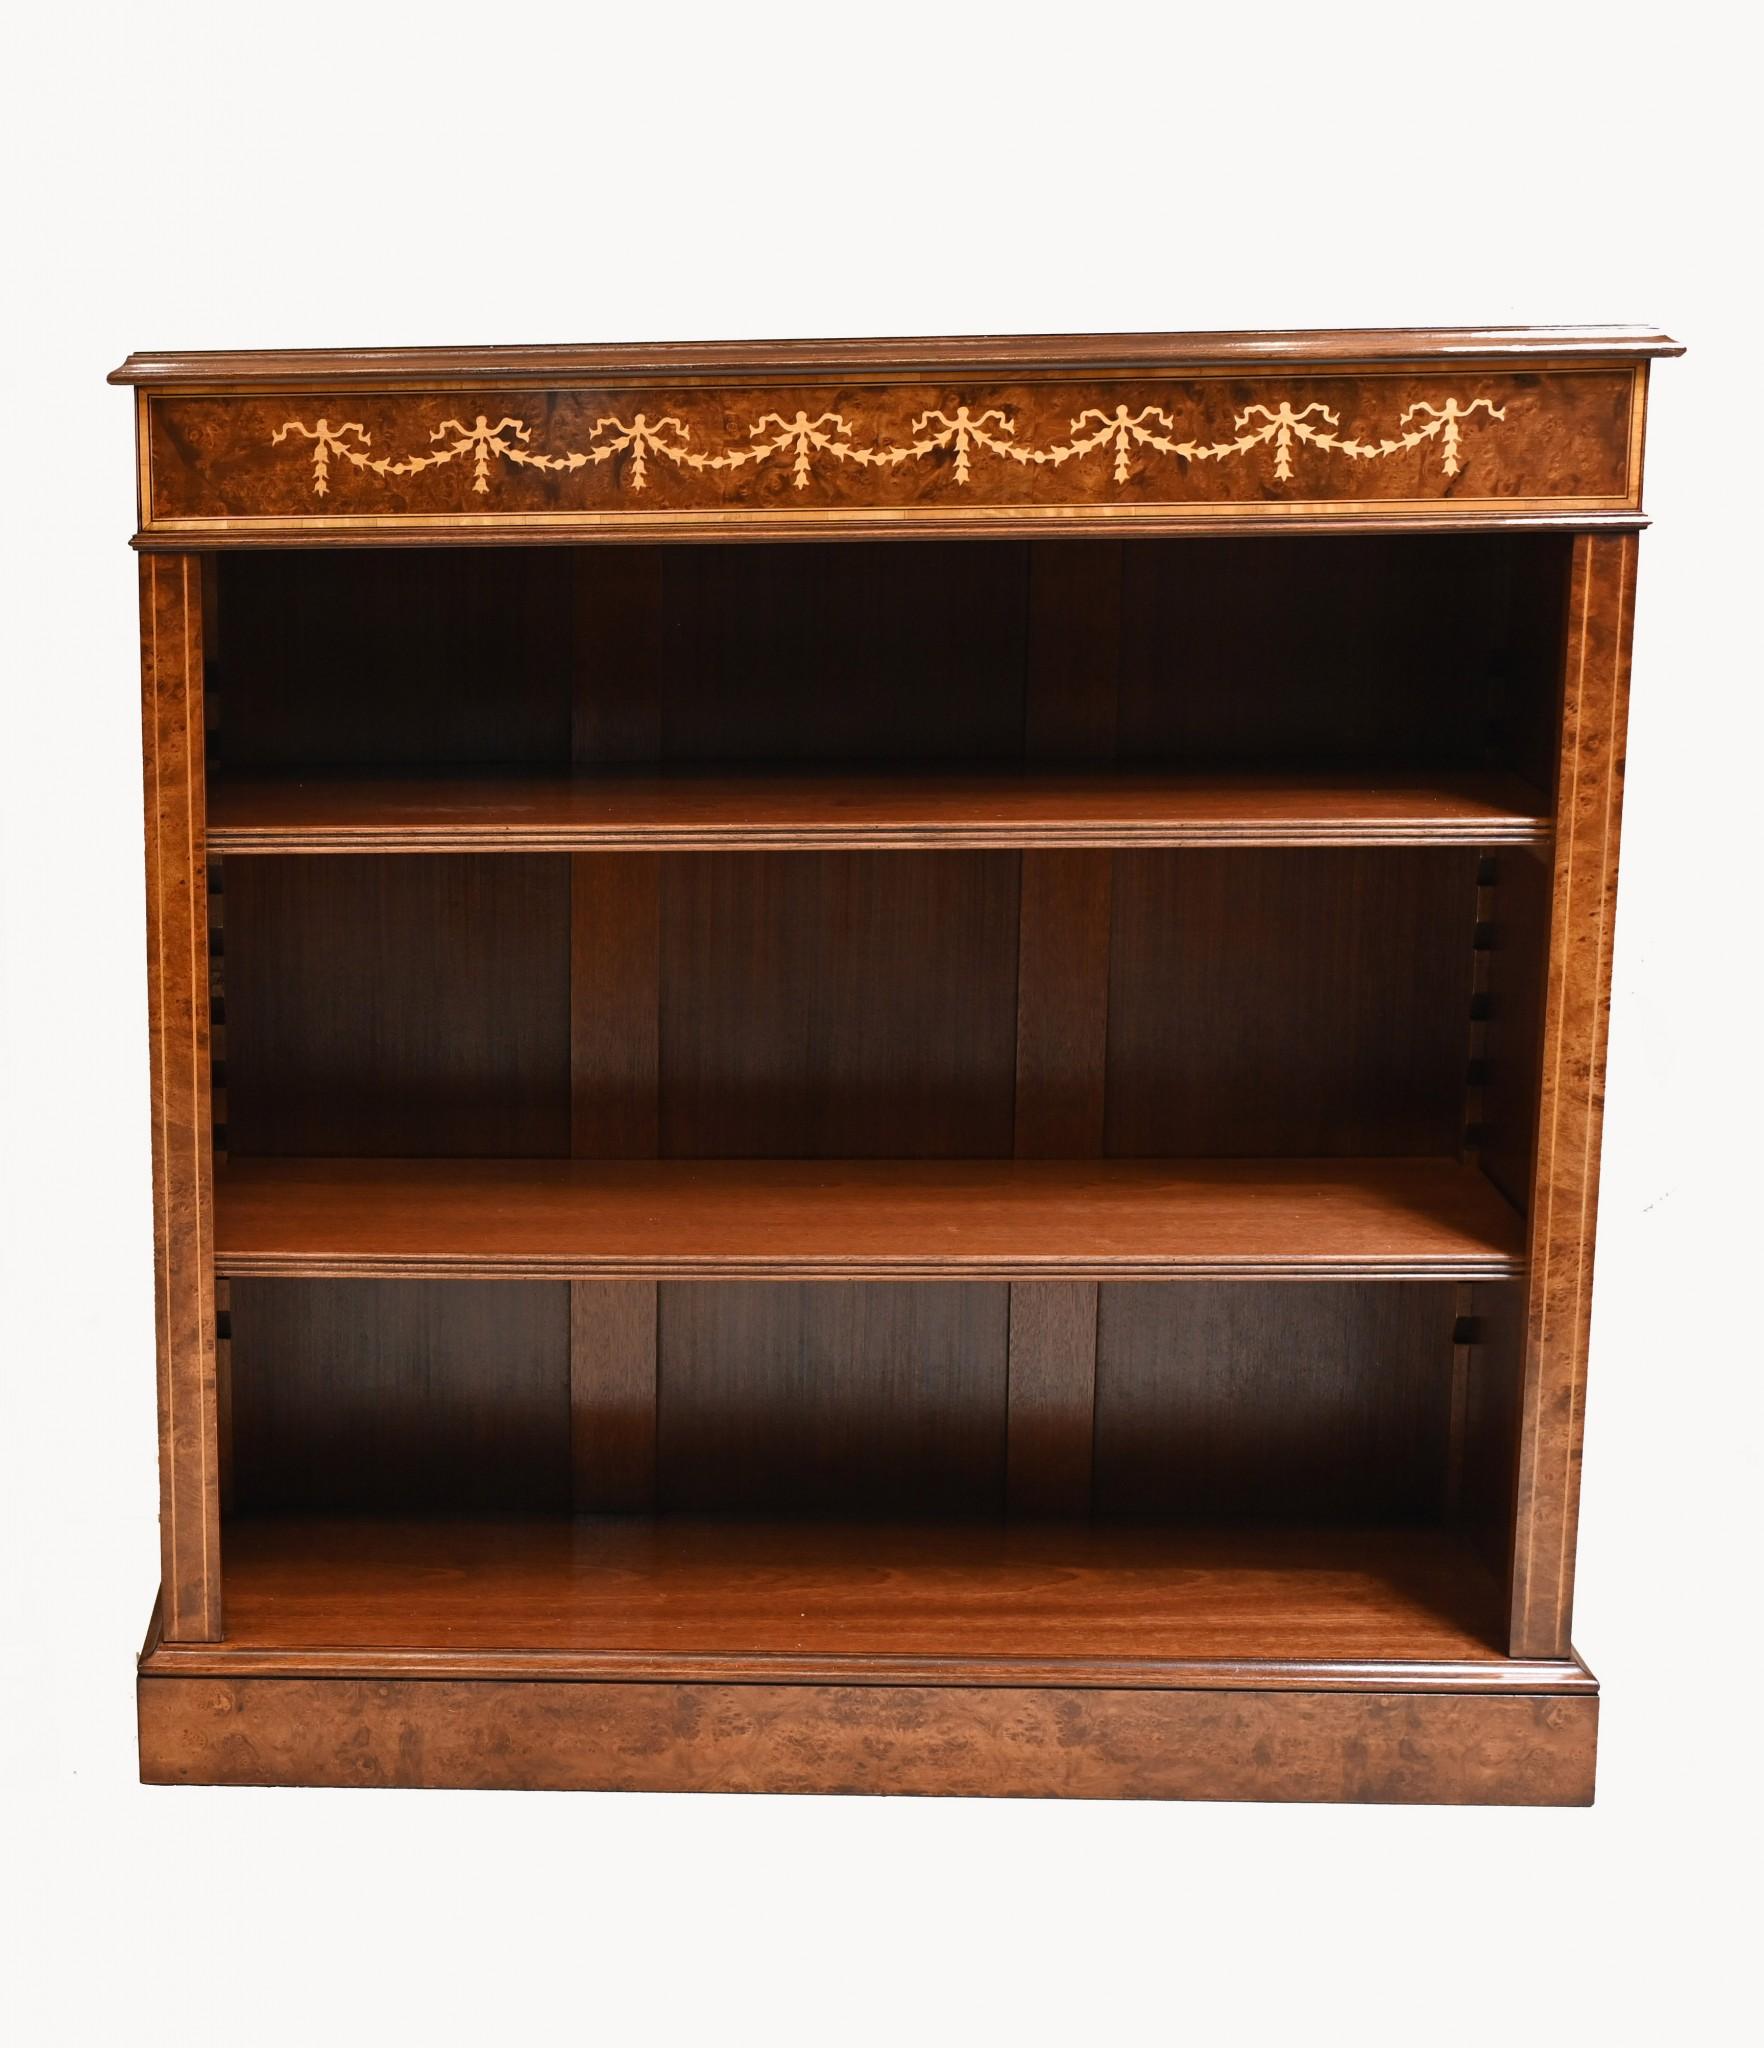 Gorgeous single English Sheraton style low openfront bookcases hand crafted from walnut
Hand crafted in England to centuries old traditions - will last for many generations
Great investment - and family heirloom
Intricate inlay work to the top